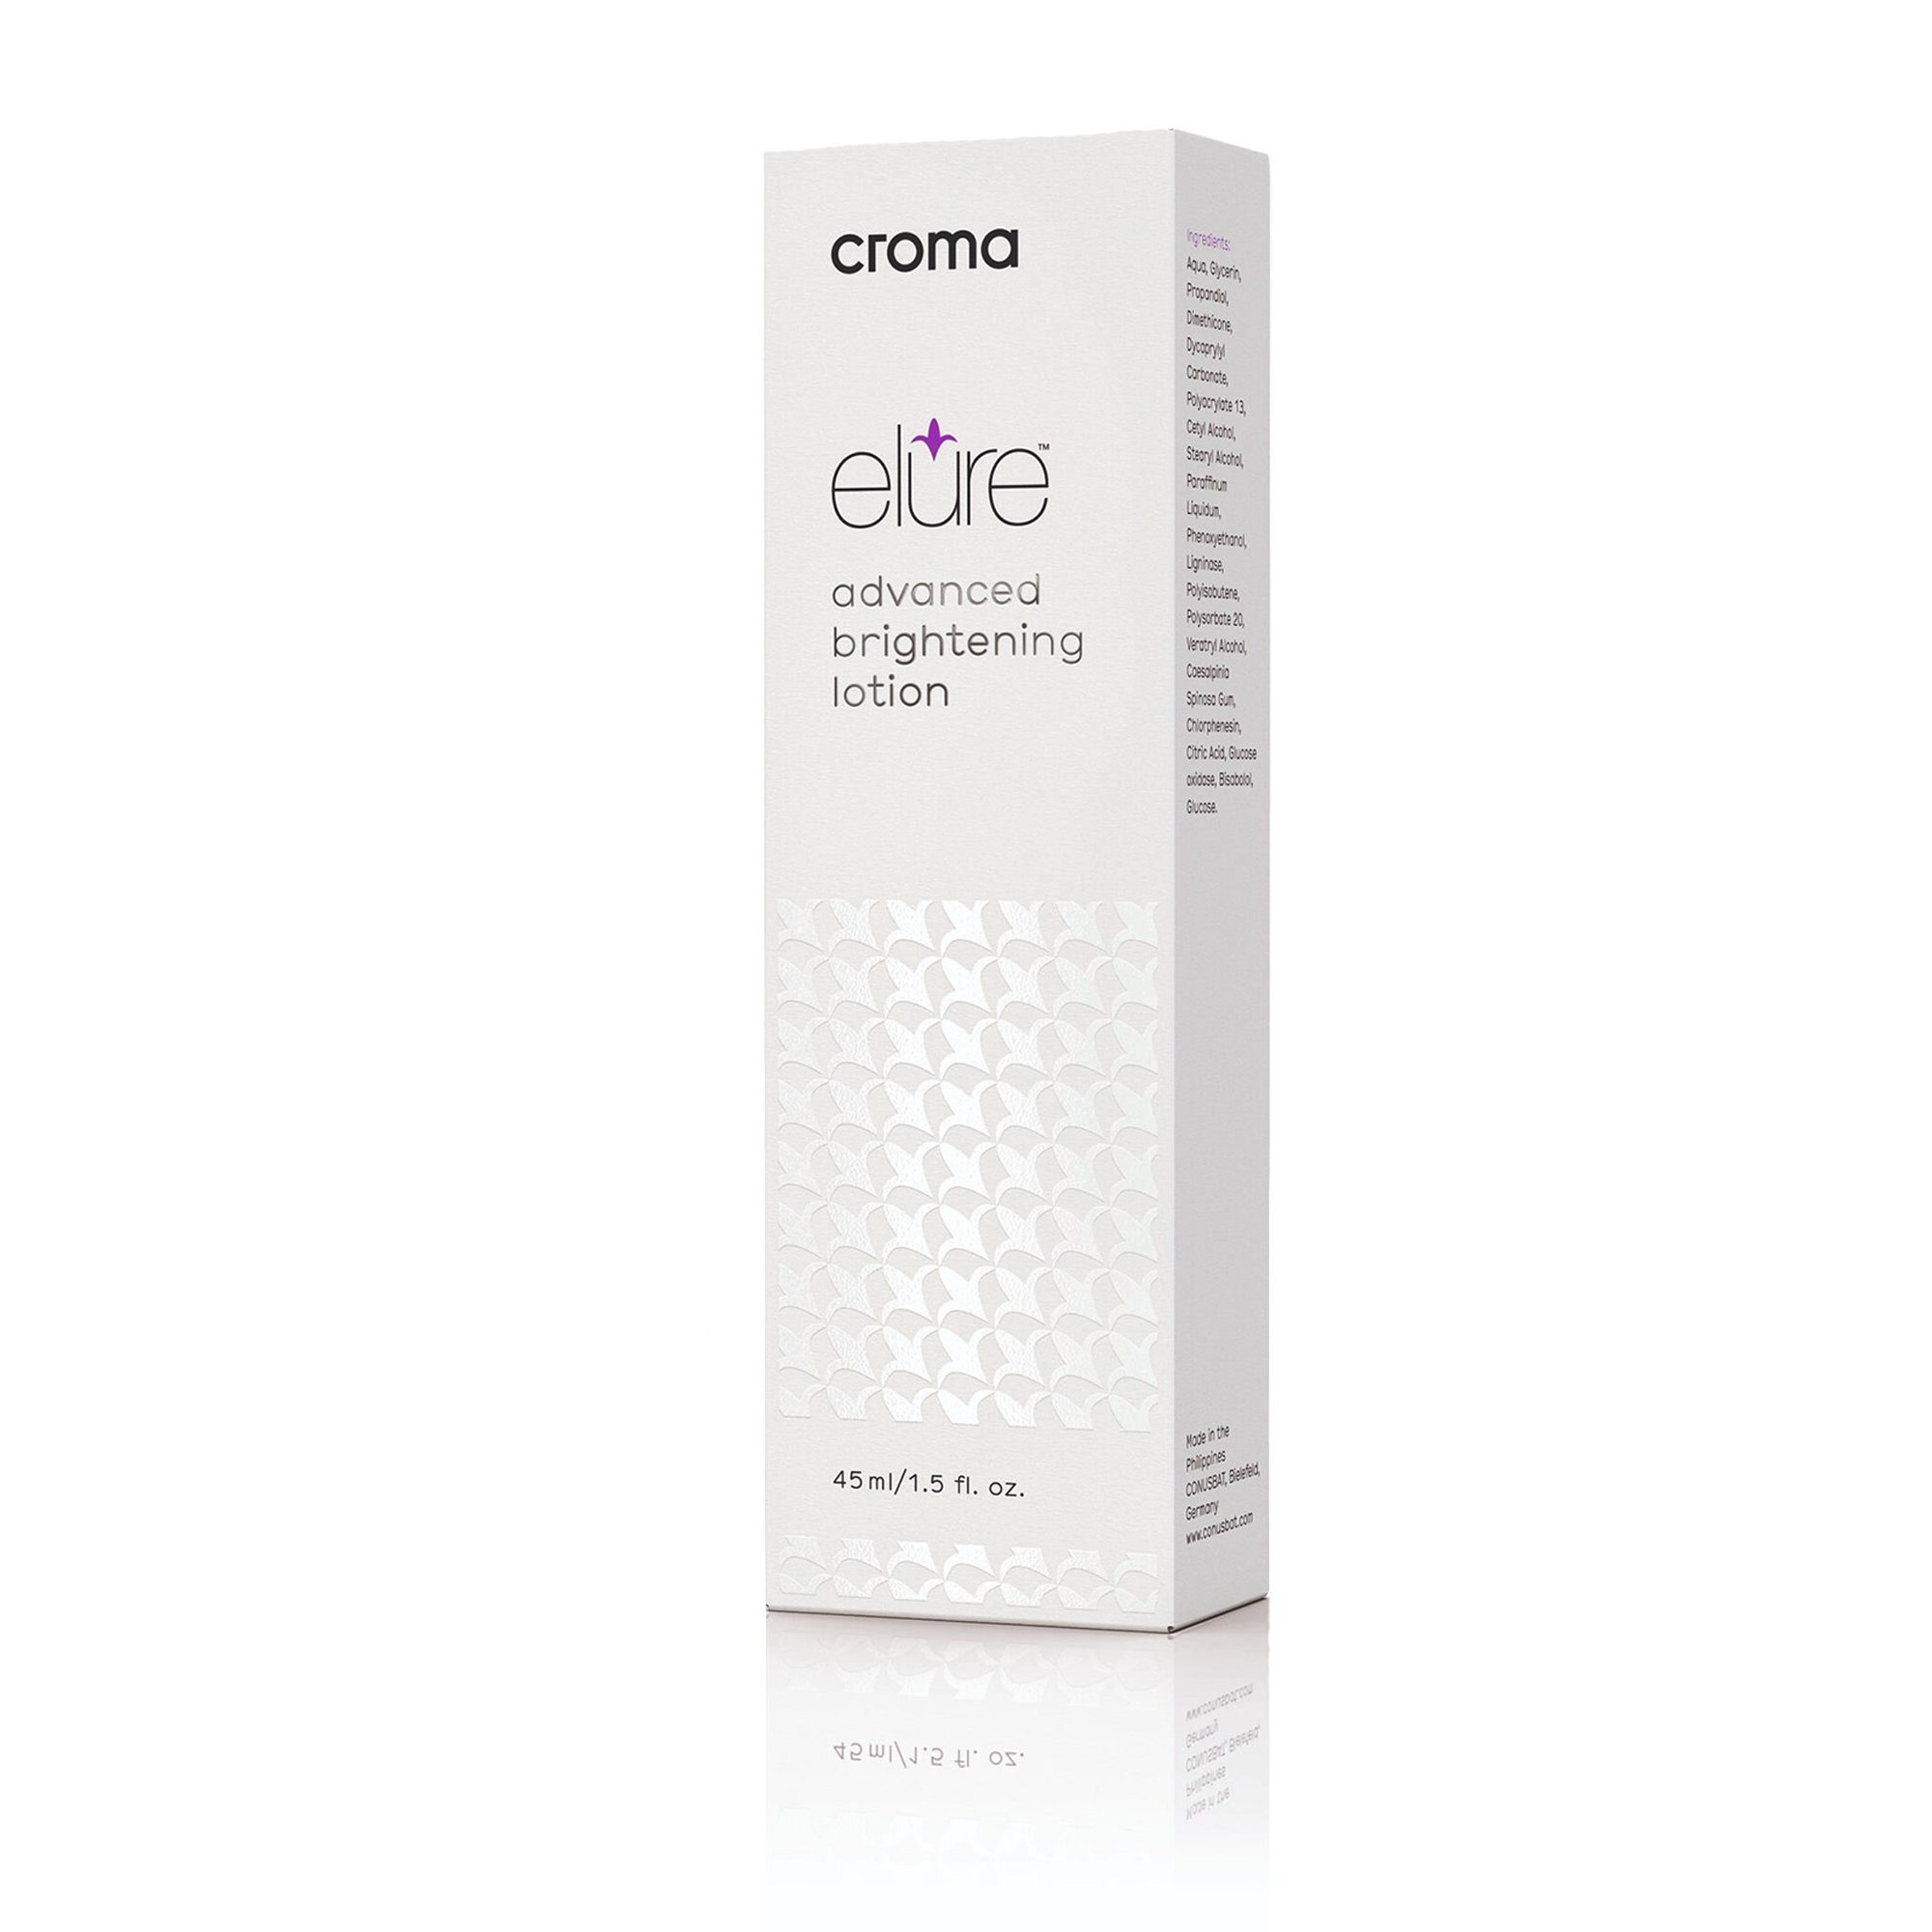 Elure Lotion Brightening Packung, 1-tlg. Croma Croma Advanced Gesichtslotion